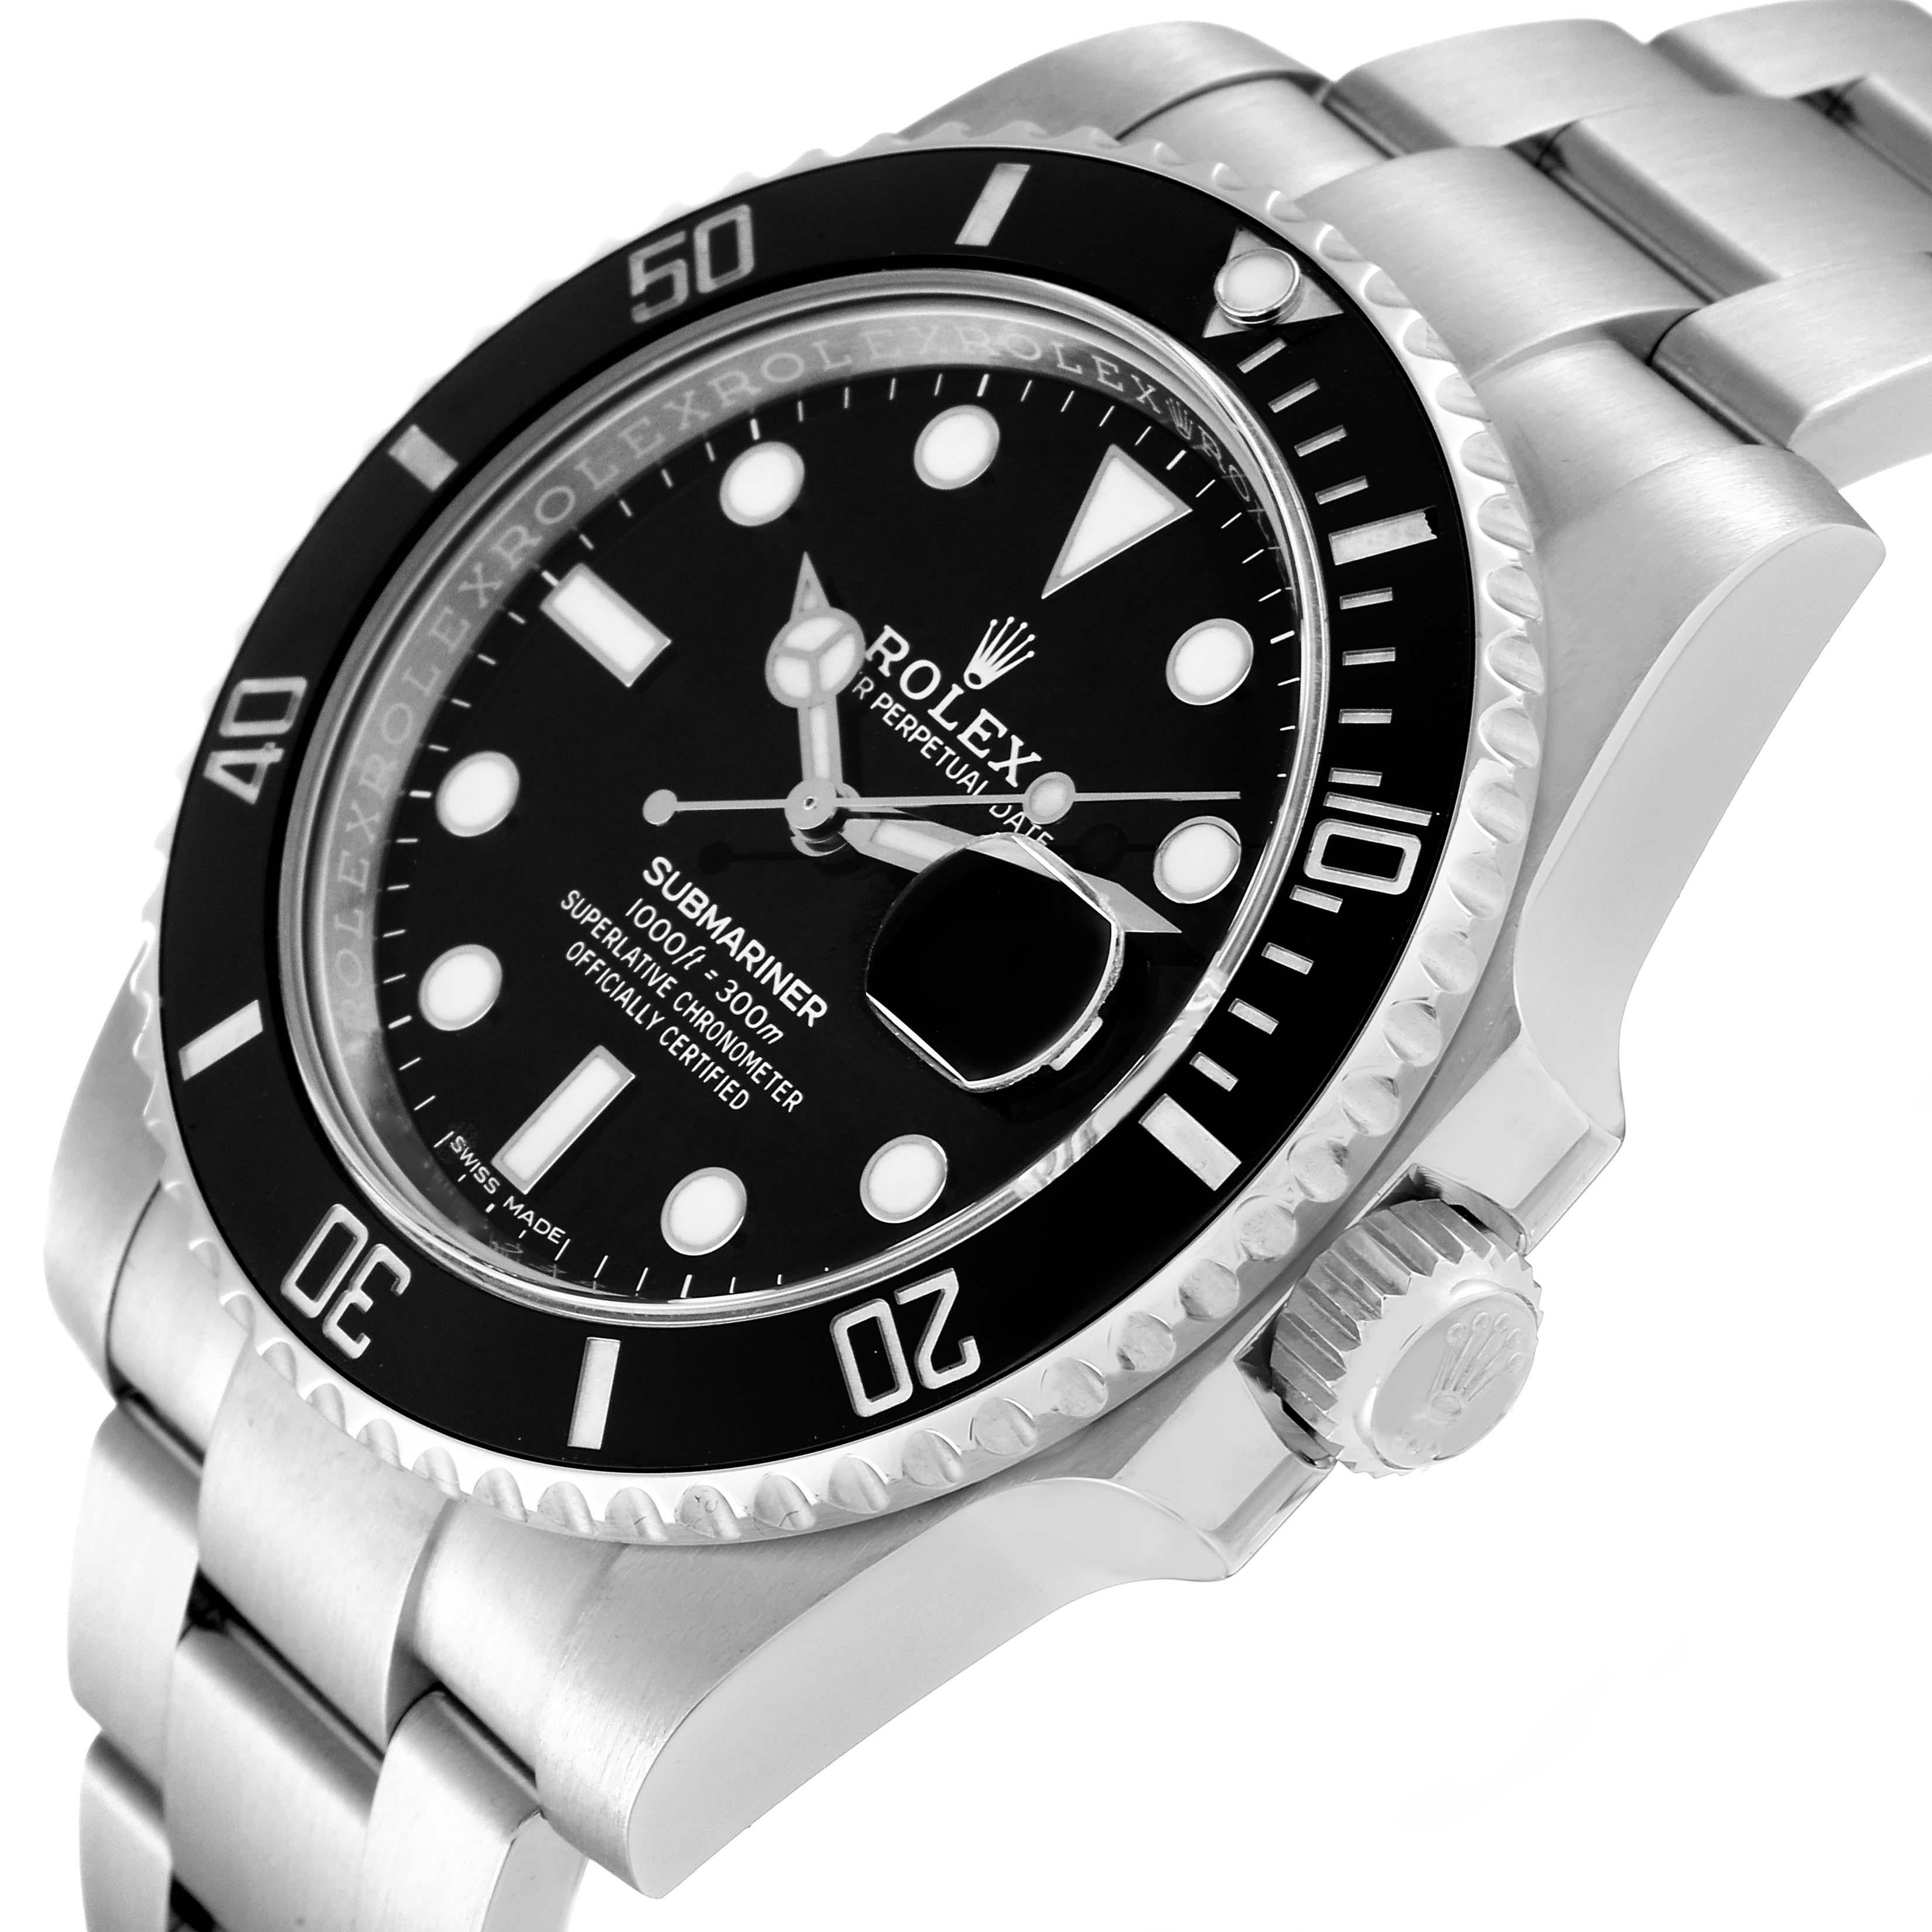 Rolex Submariner Date Black Dial Steel Mens Watch 116610 In Excellent Condition For Sale In Atlanta, GA